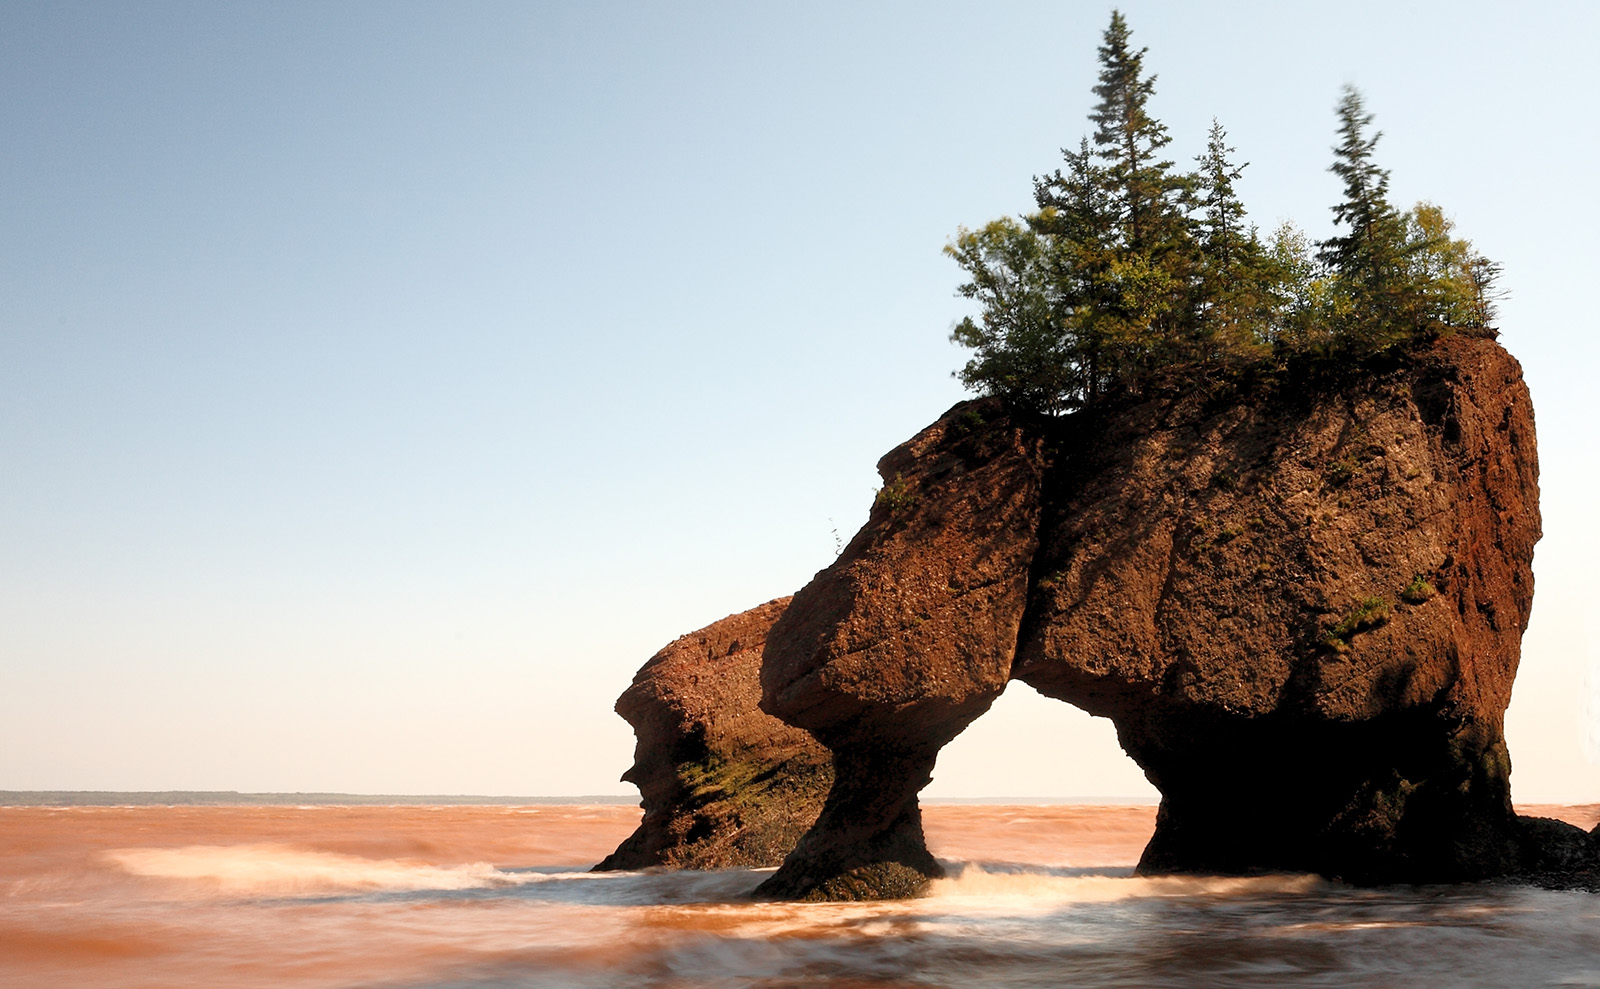 reddish-brown rock formation on the beach with pine trees growing on top